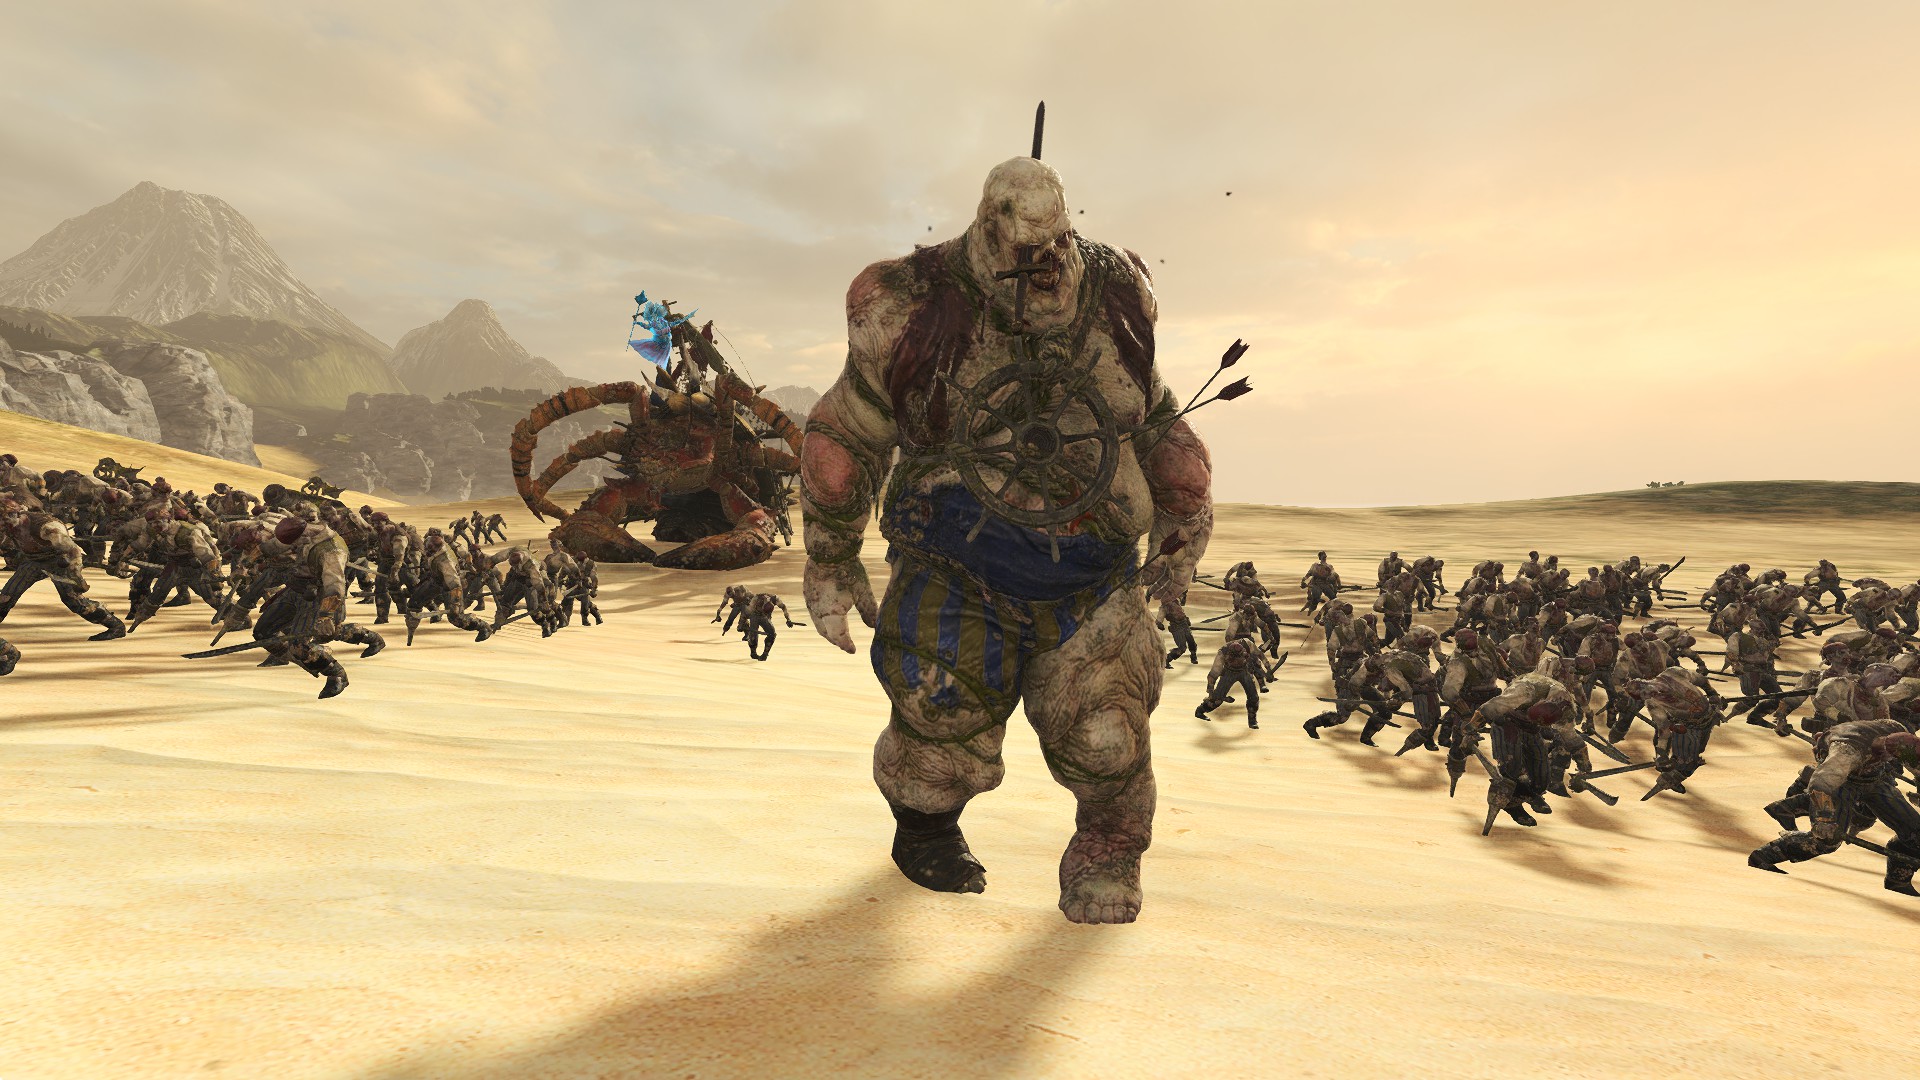 An army of zombie pirates marches over the sand